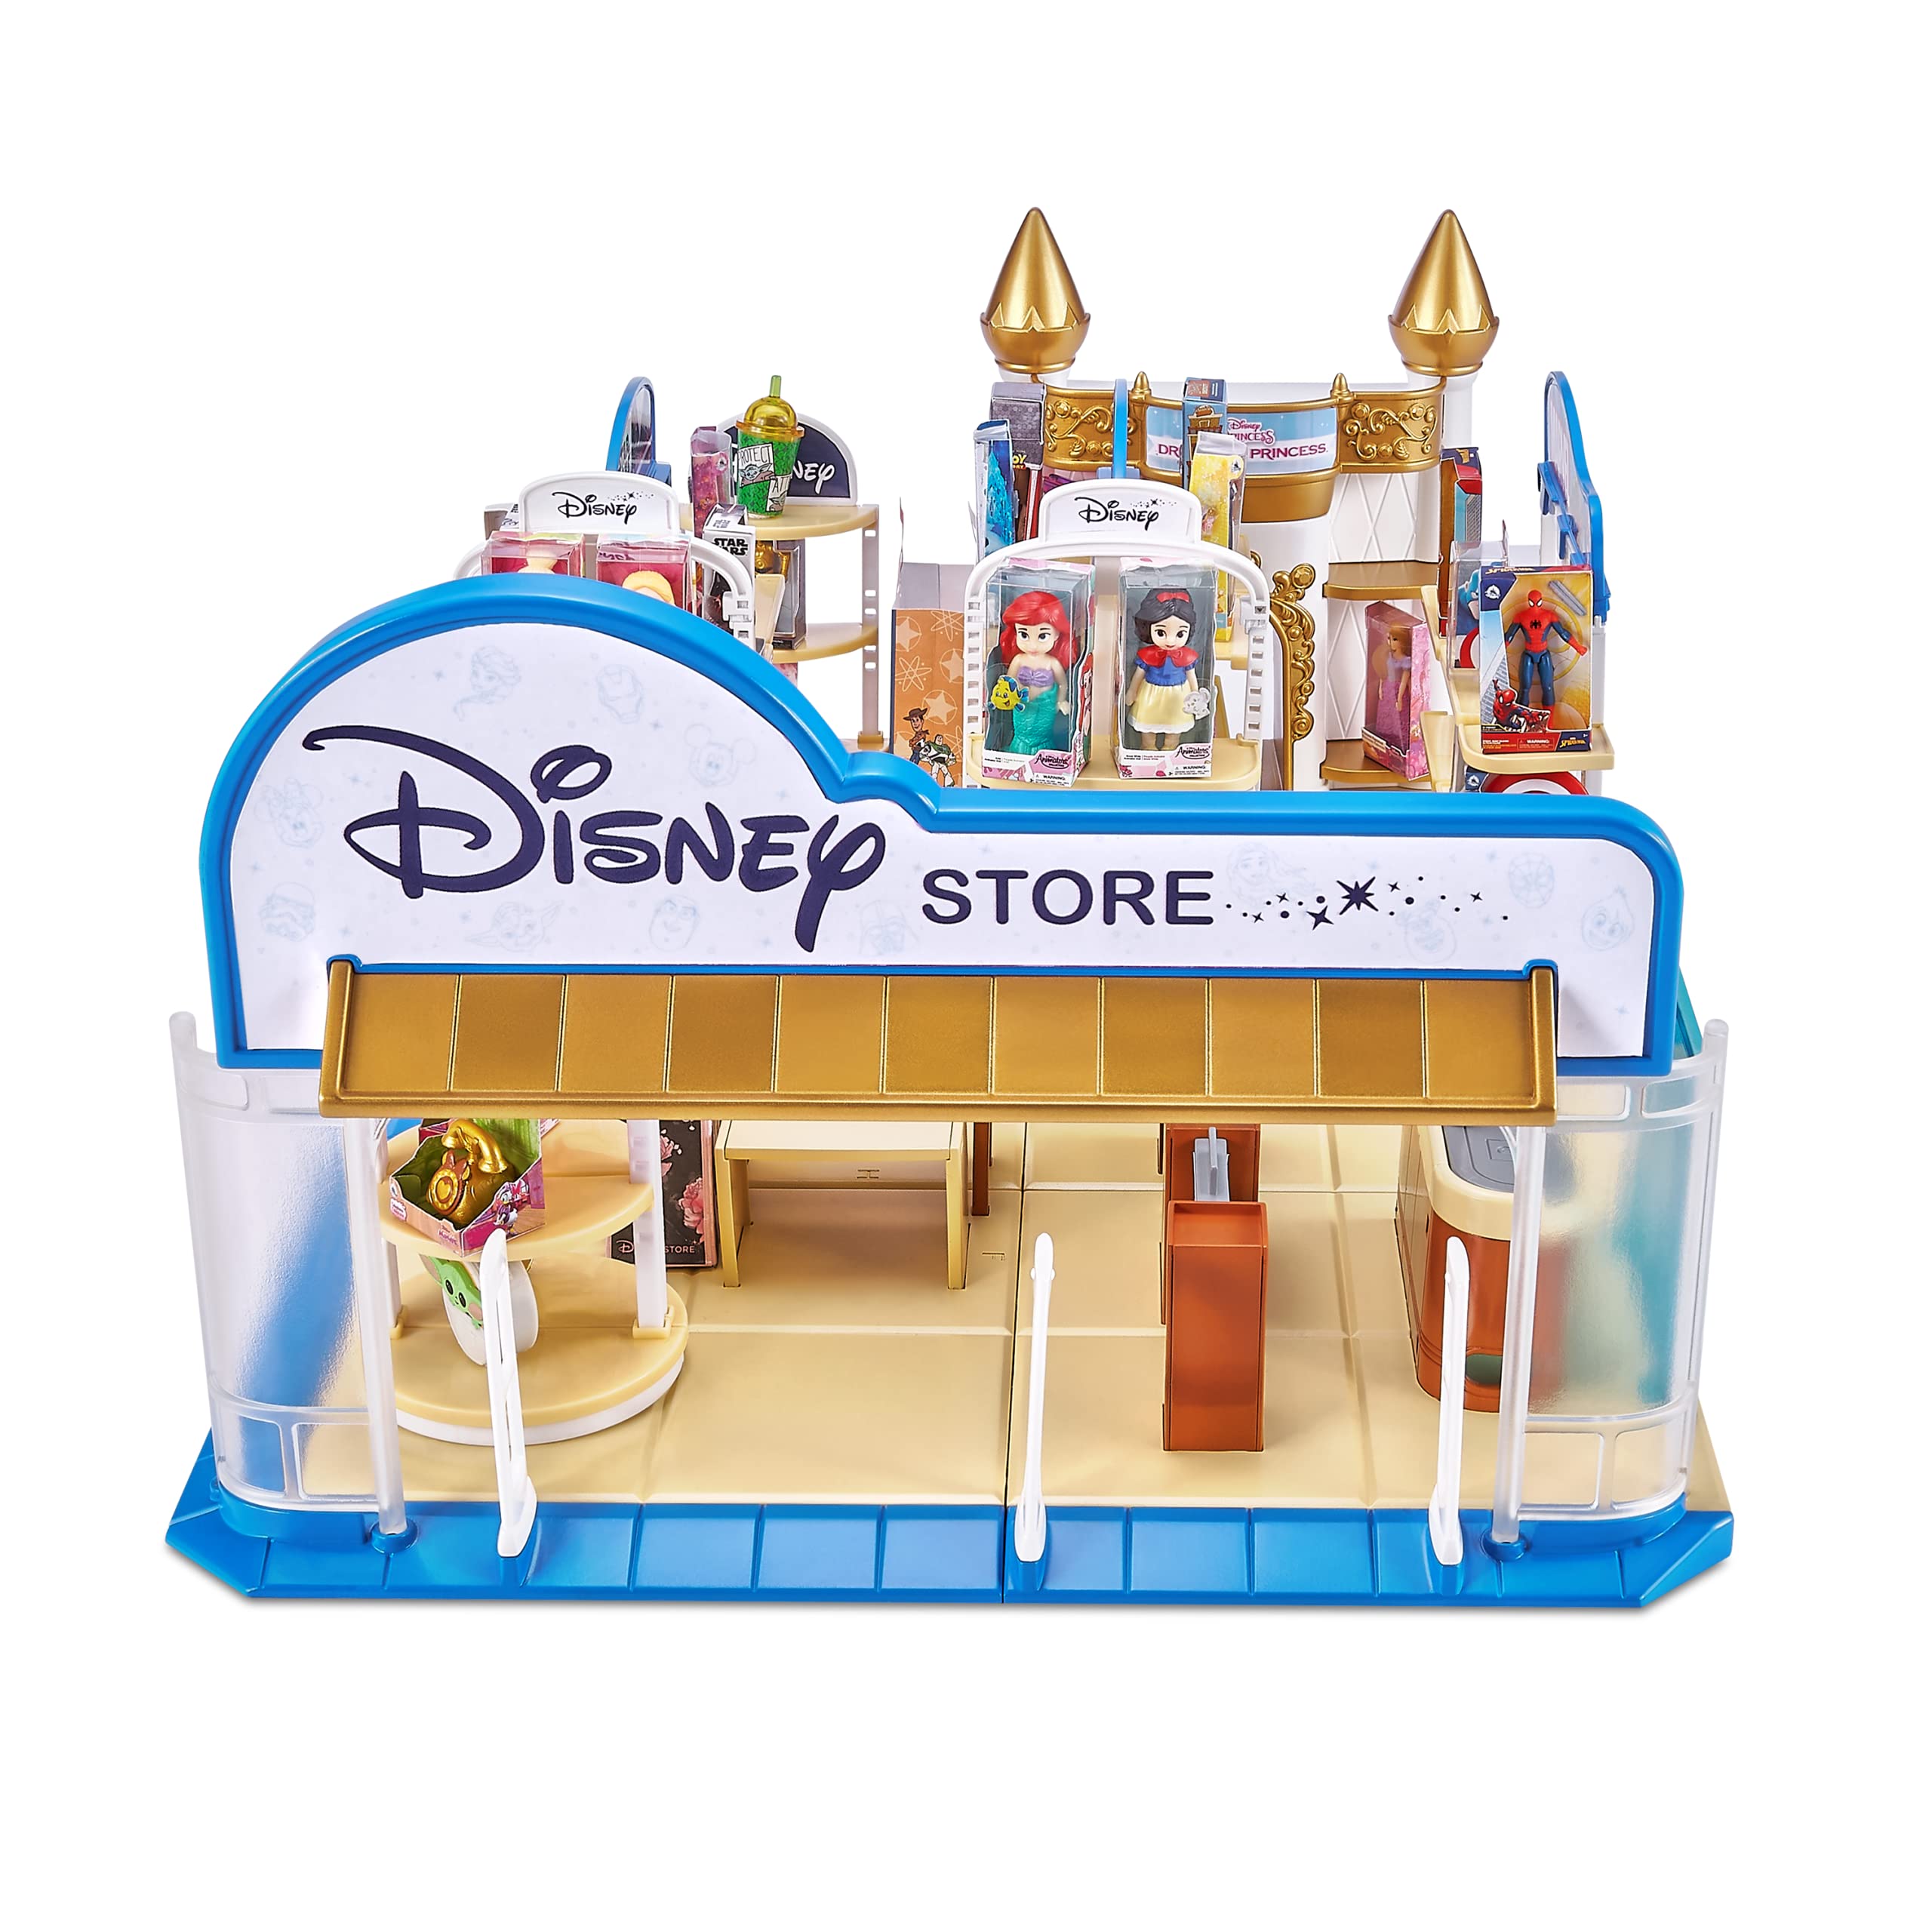 5 Surprise Mini Brands Disney Toy Store Playset by Zuru - Includes 5 Exclusive Mystery Mini's, Store and Display Mini Collectibles for Kids, Teens, and Adults